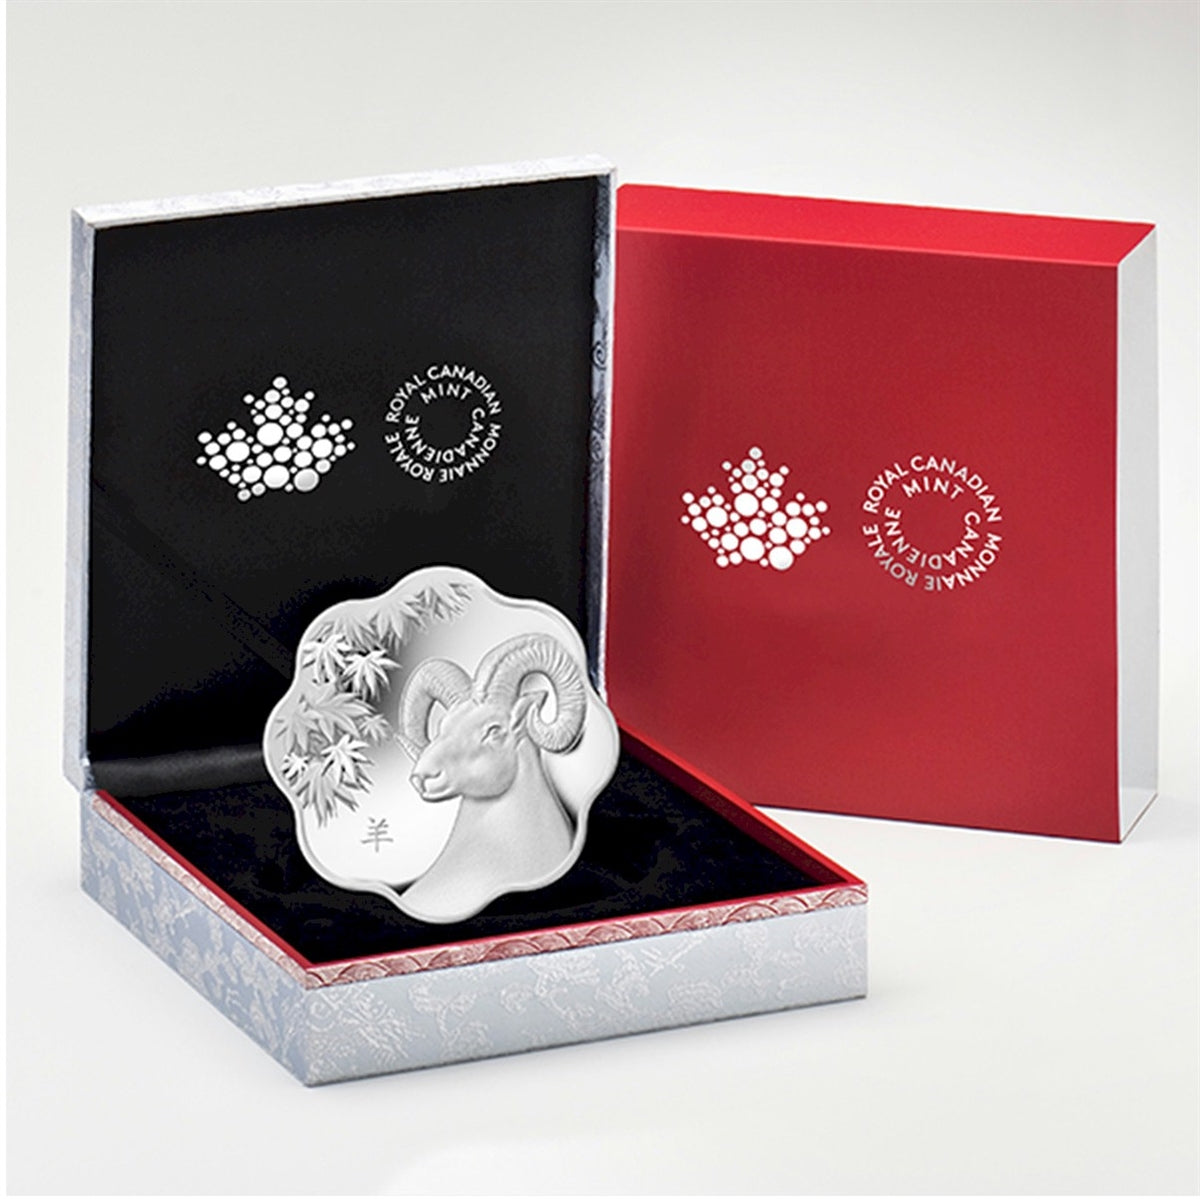 2015 Canada $15 Lunar Lotus Year of the Sheep Fine Silver (No Tax)